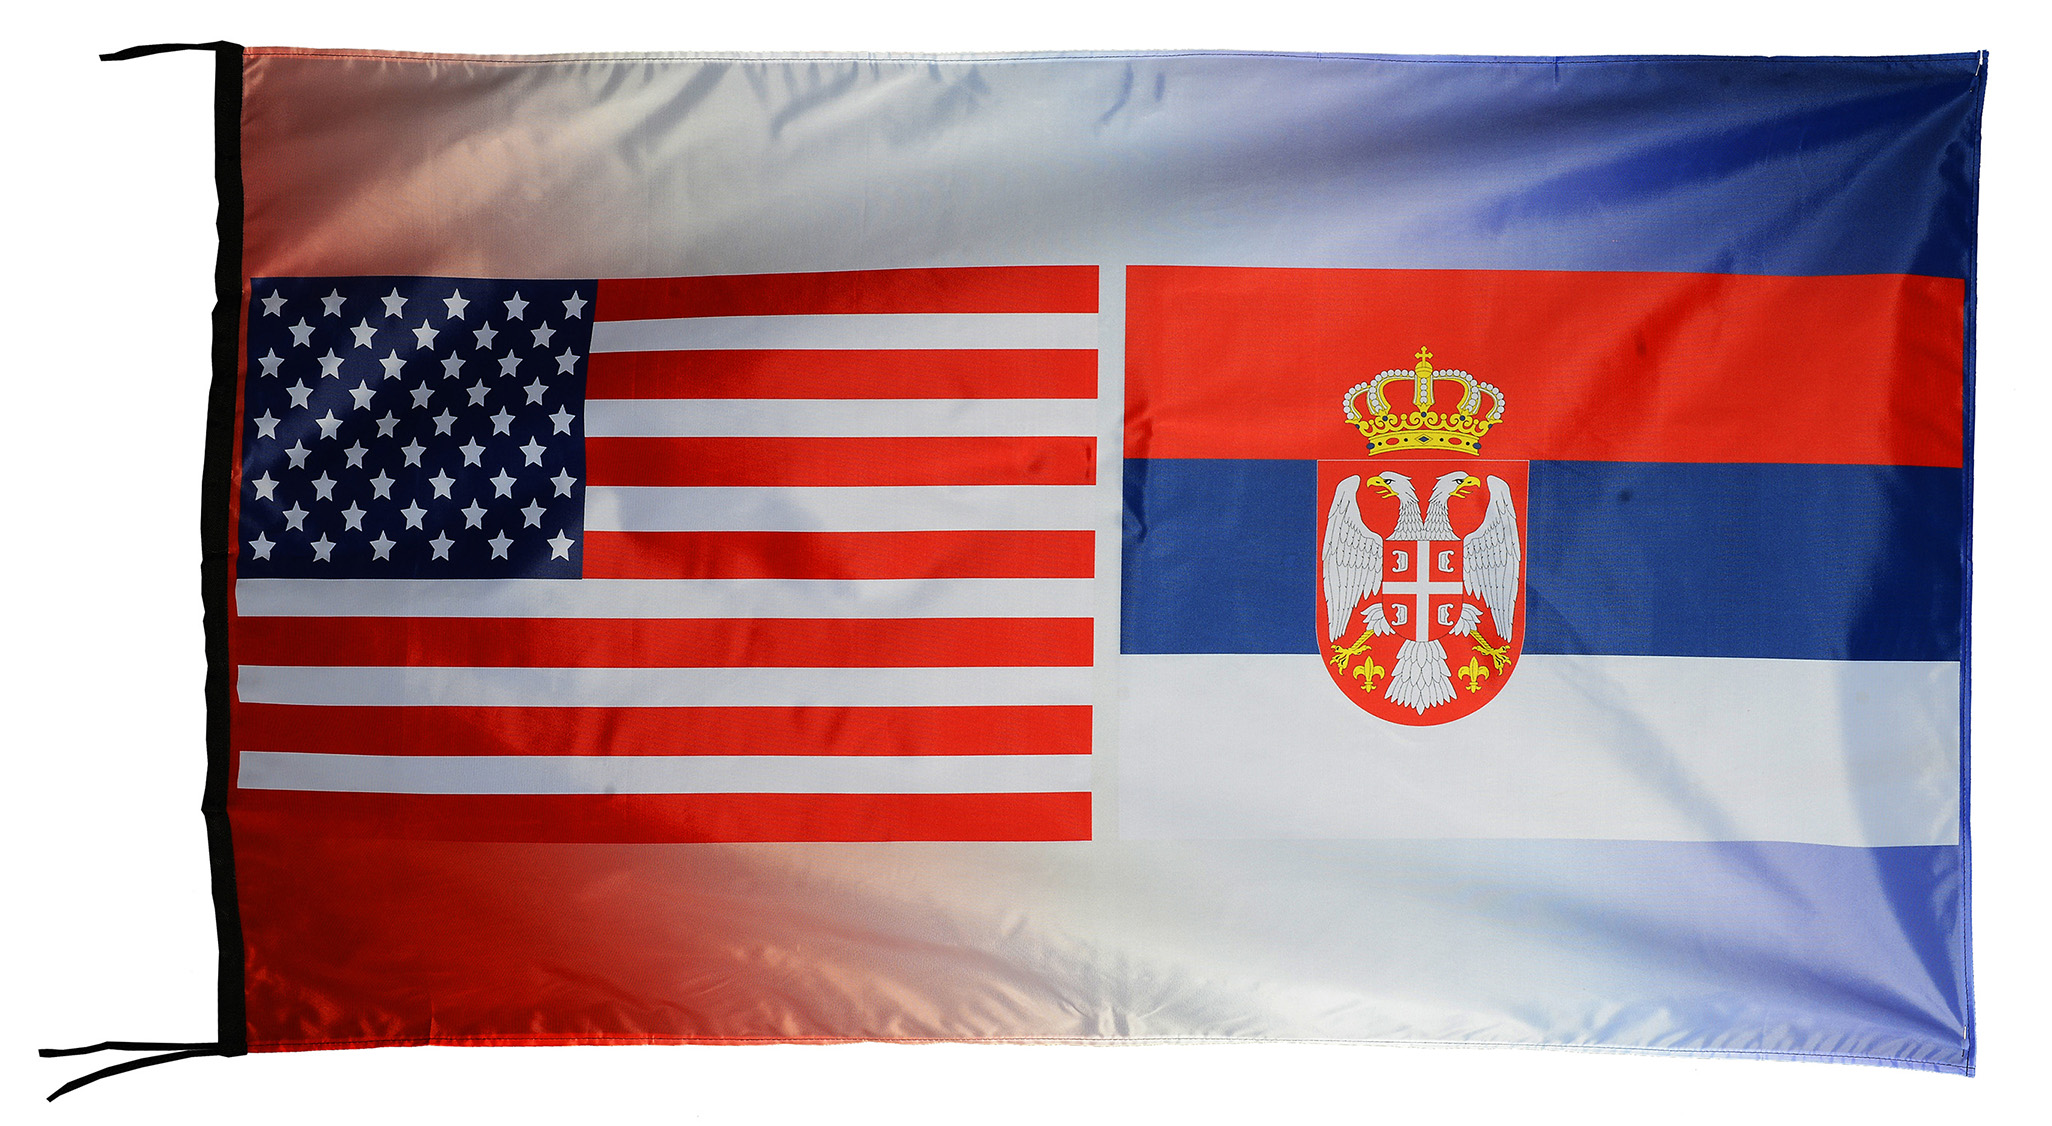 Flag  157 USA / US Country / United States Of America and Serbia / Patriotic / Pride Hybrid Weather-Resistant Polyester Outdoor Flag Landscape Banner / Vivid Colors / 3 X 5 FT (150 x 90cm) International Flags for Sale